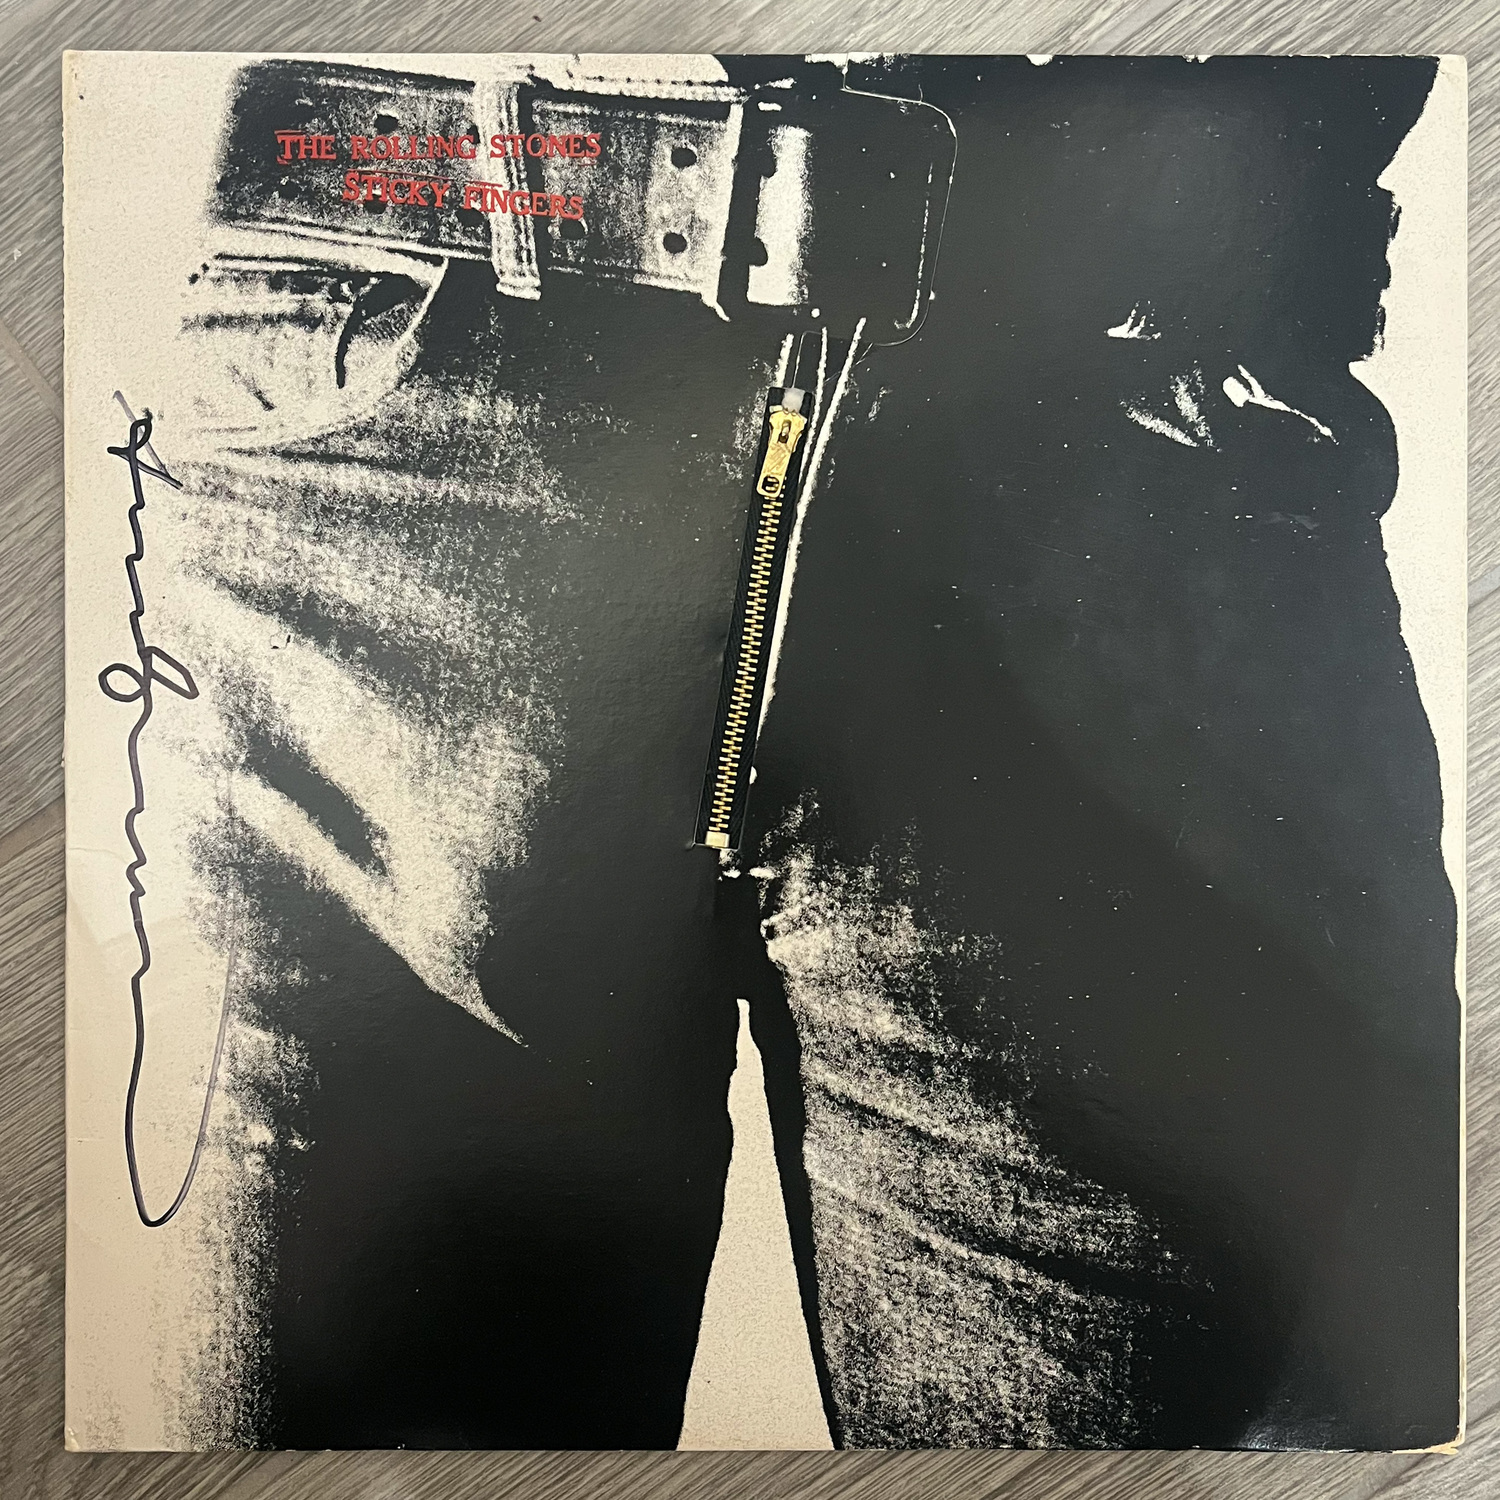 Rolling Stones Sticky Fingers Original Vinyl Signed by Andy Warhol